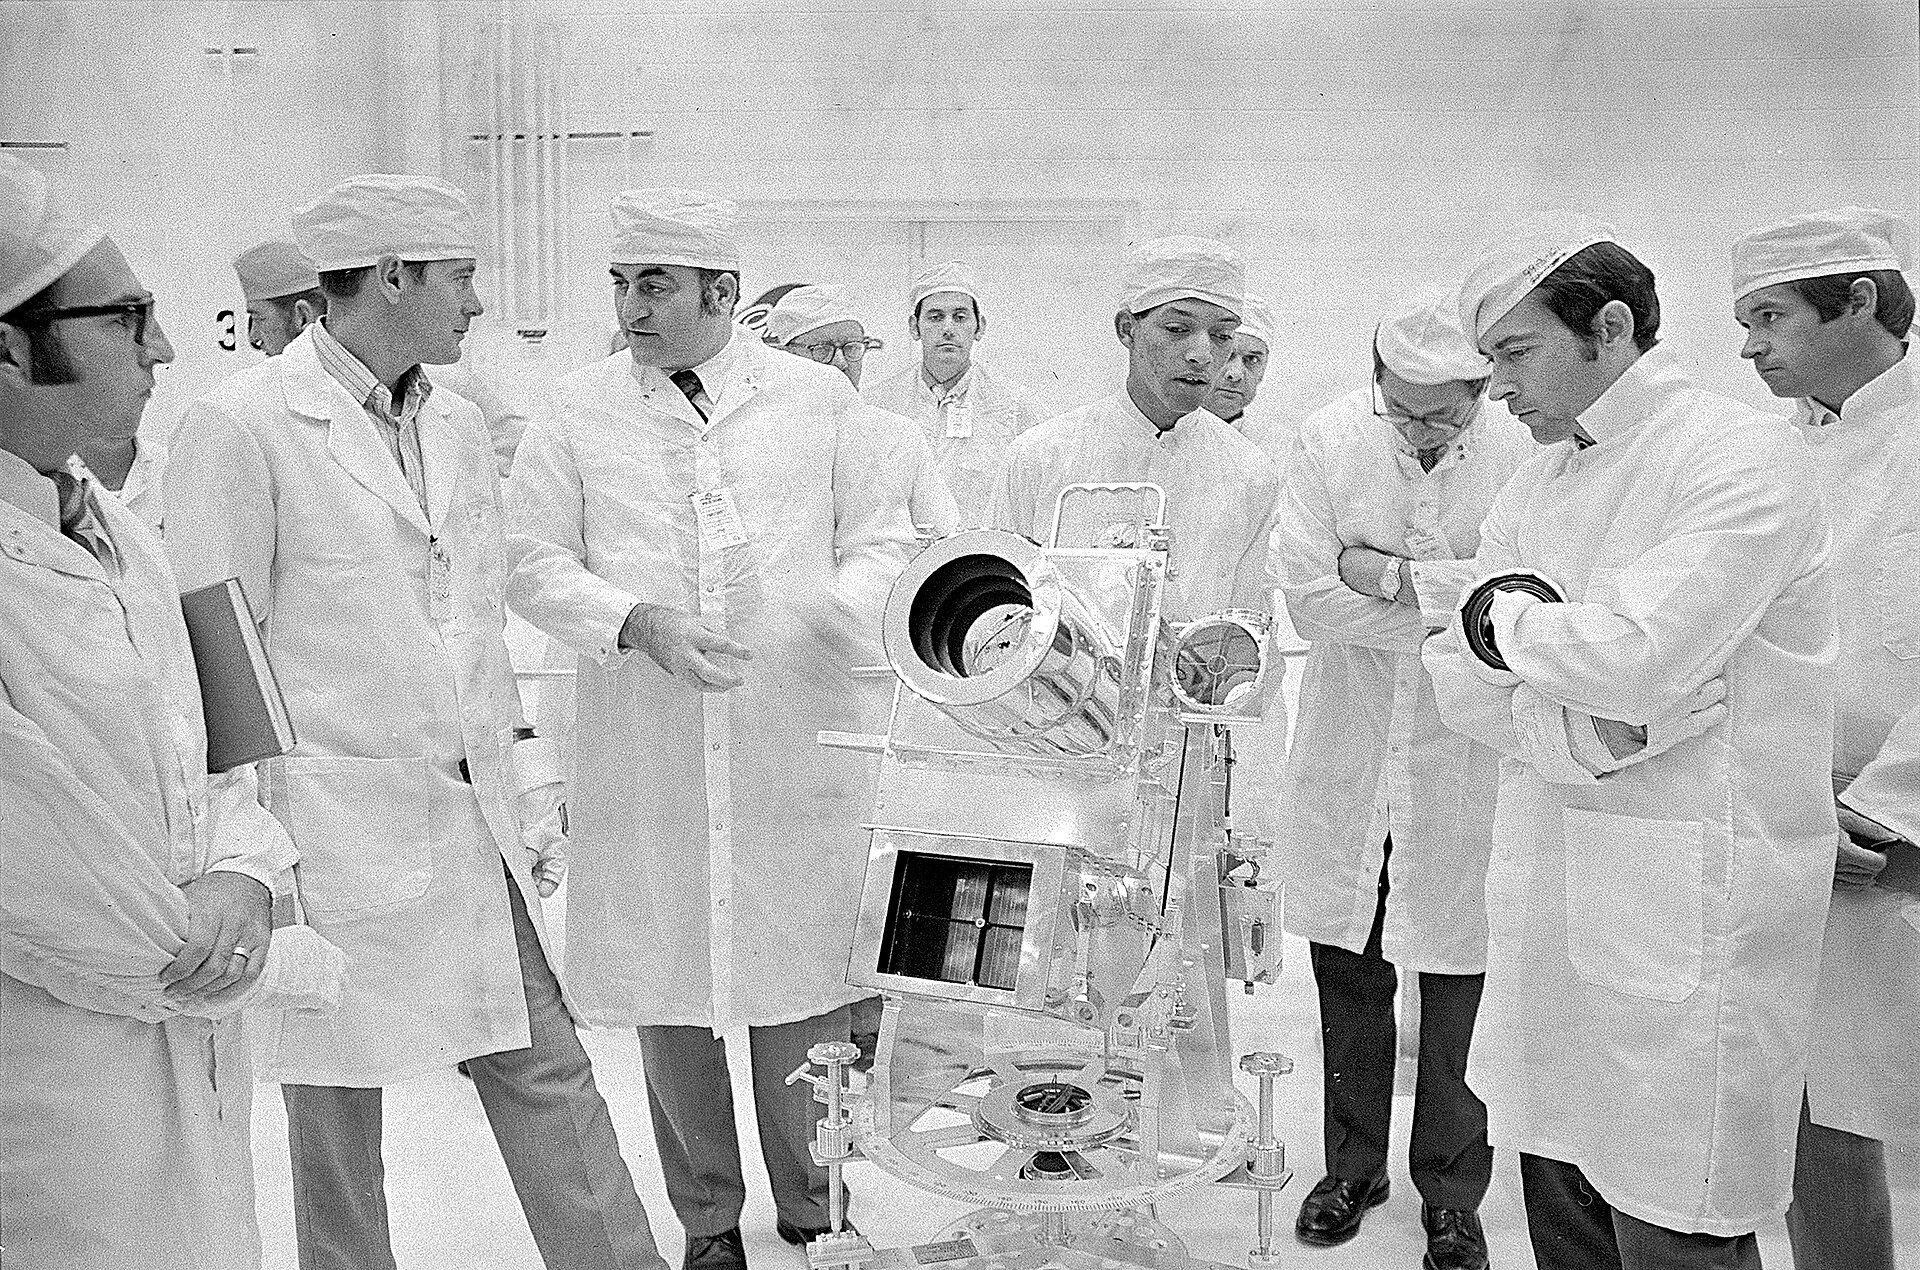 A black-and-white photo shows a group of at least 11 men wearing white lab coats and white caps; a telescopic object sits in front. Carruthers, in the center, is speaking.